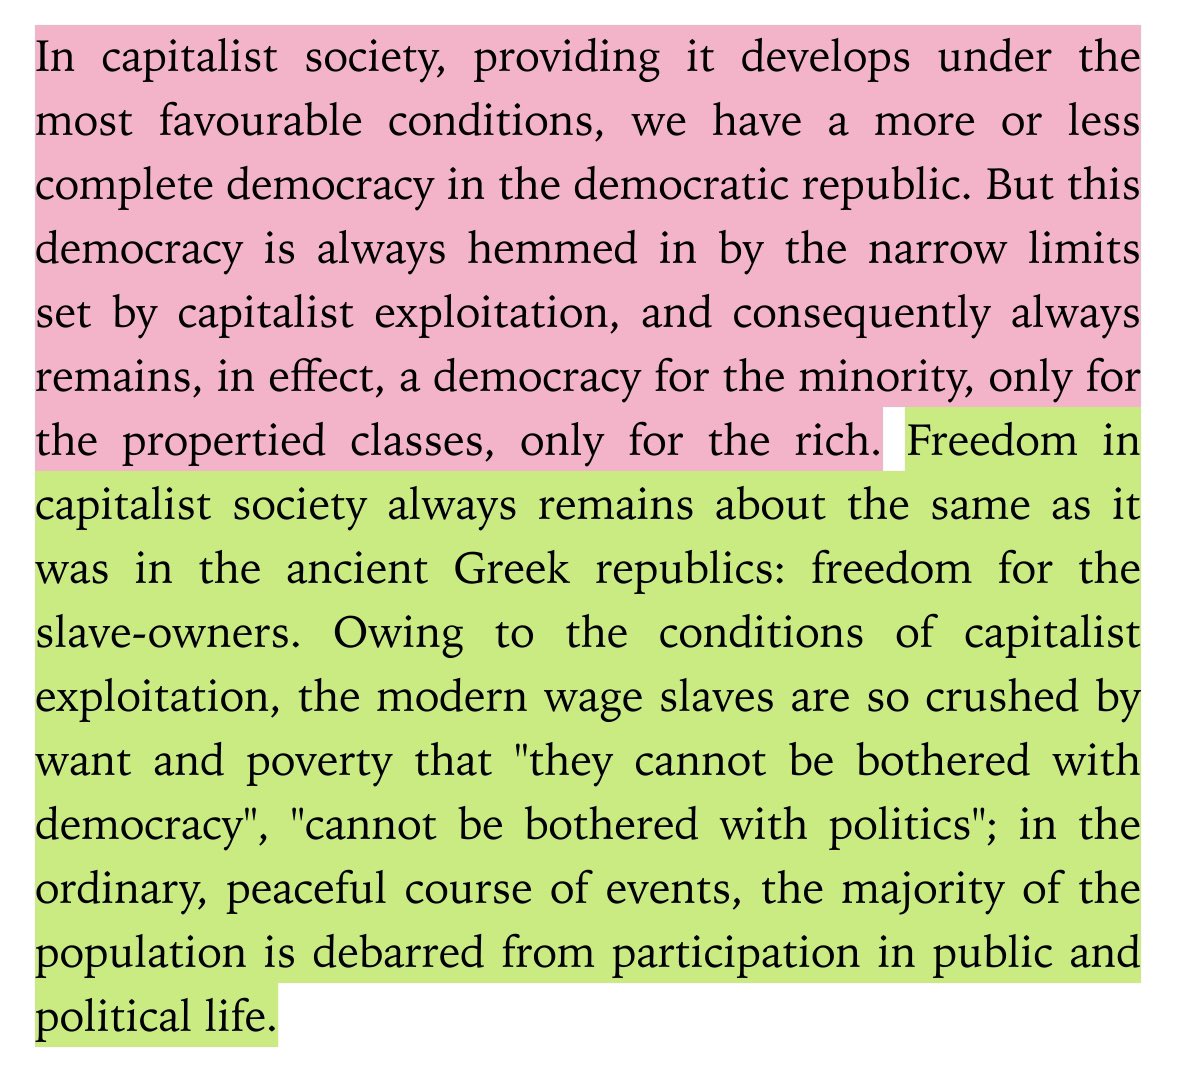 “the modern wage slaves are so crushed by want and poverty that ‘they cannot be bothered with democracy,’ ‘cannot be bothered with politics’; in the ordinary, peaceful course of events, the majority of the population is debarred from participation in public and political life.”